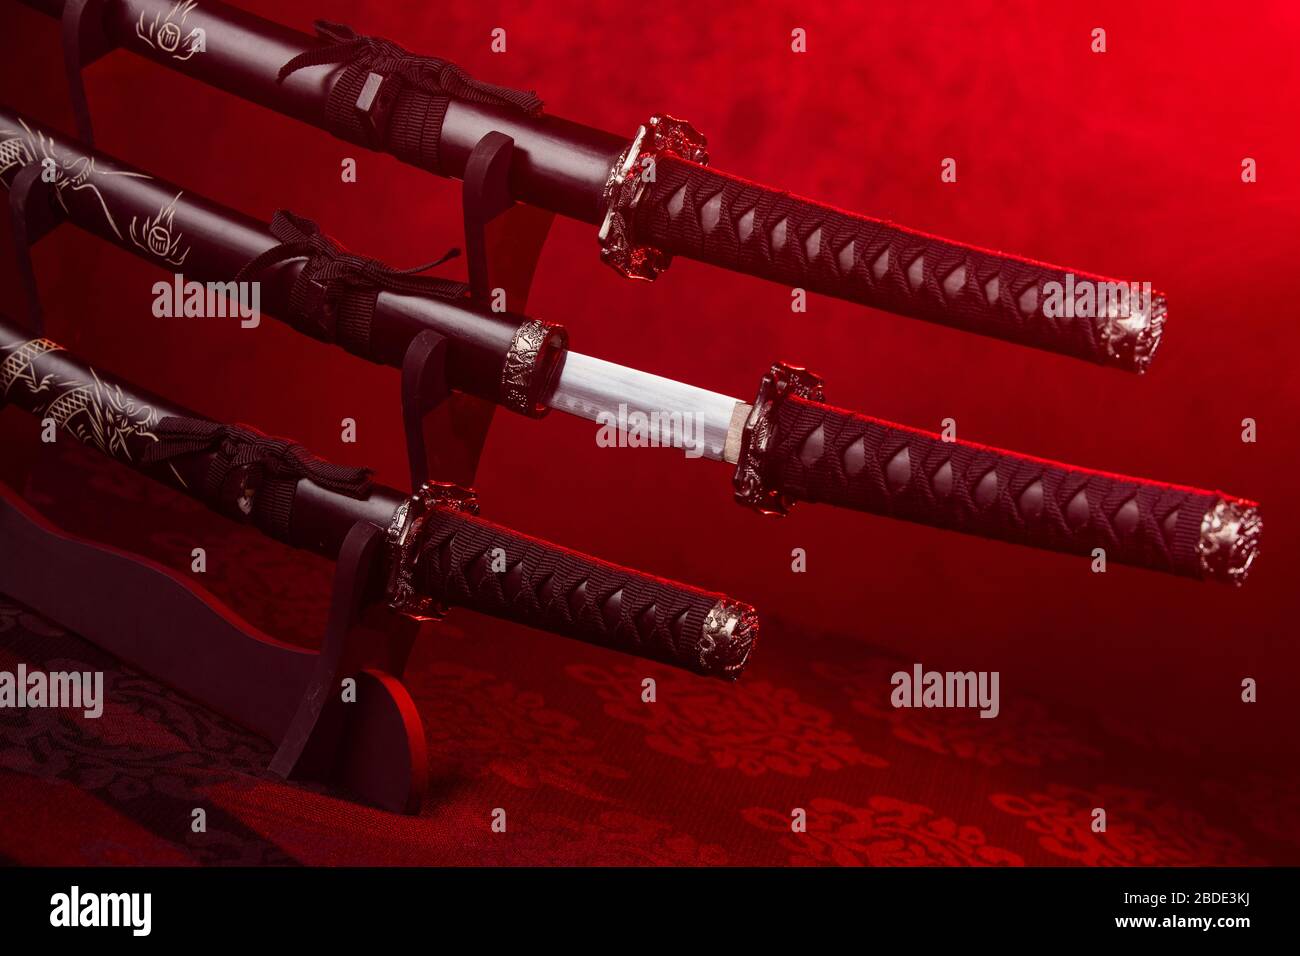 Stand with swords, middle one partially exposed, red light Stock Photo